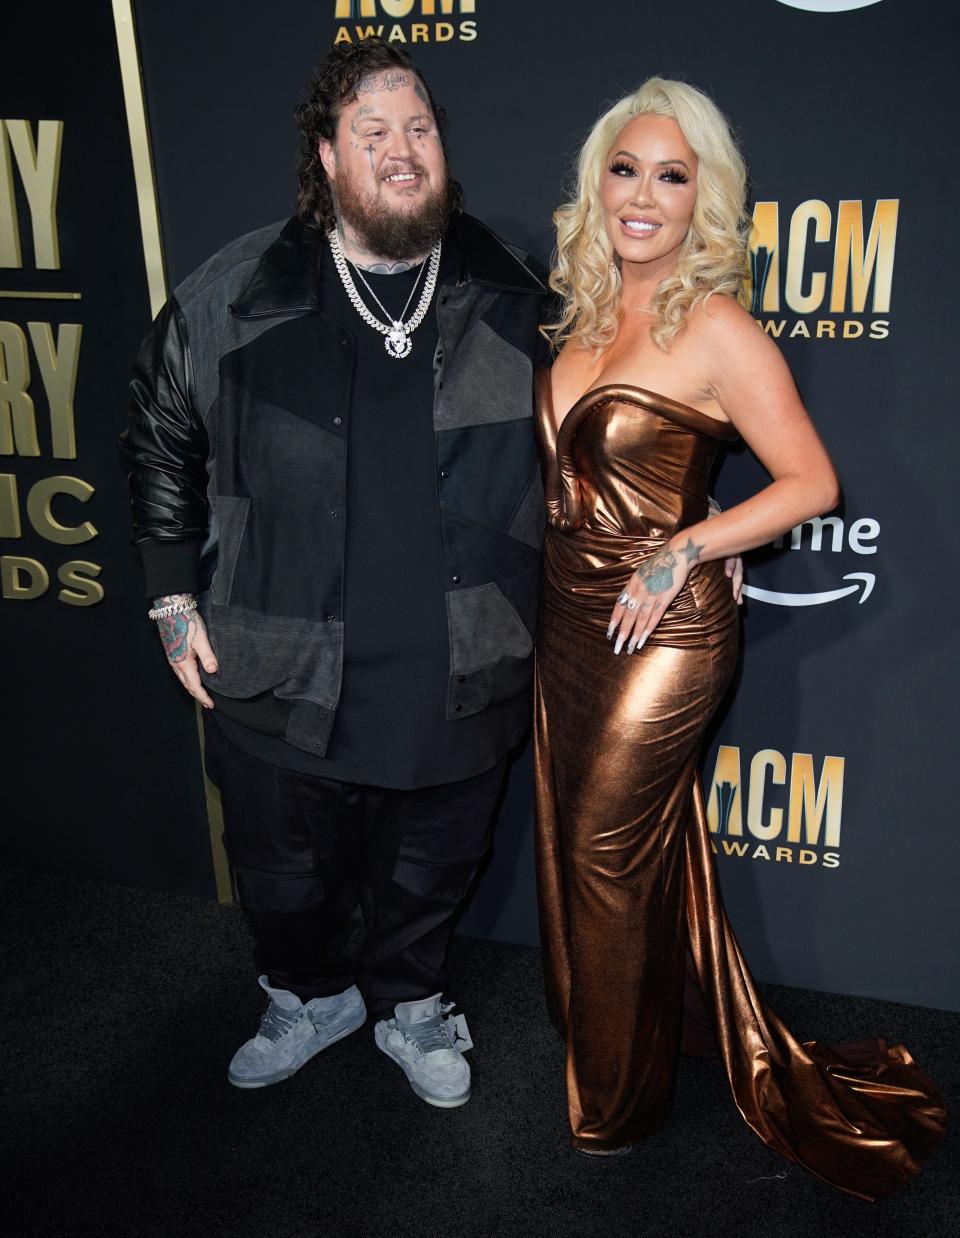 Jelly Roll and Bunnie XO arrive for the 58th ACM Awards at the Ford Center at the Star in Frisco Texas, on Thursday, May 11, 2023.